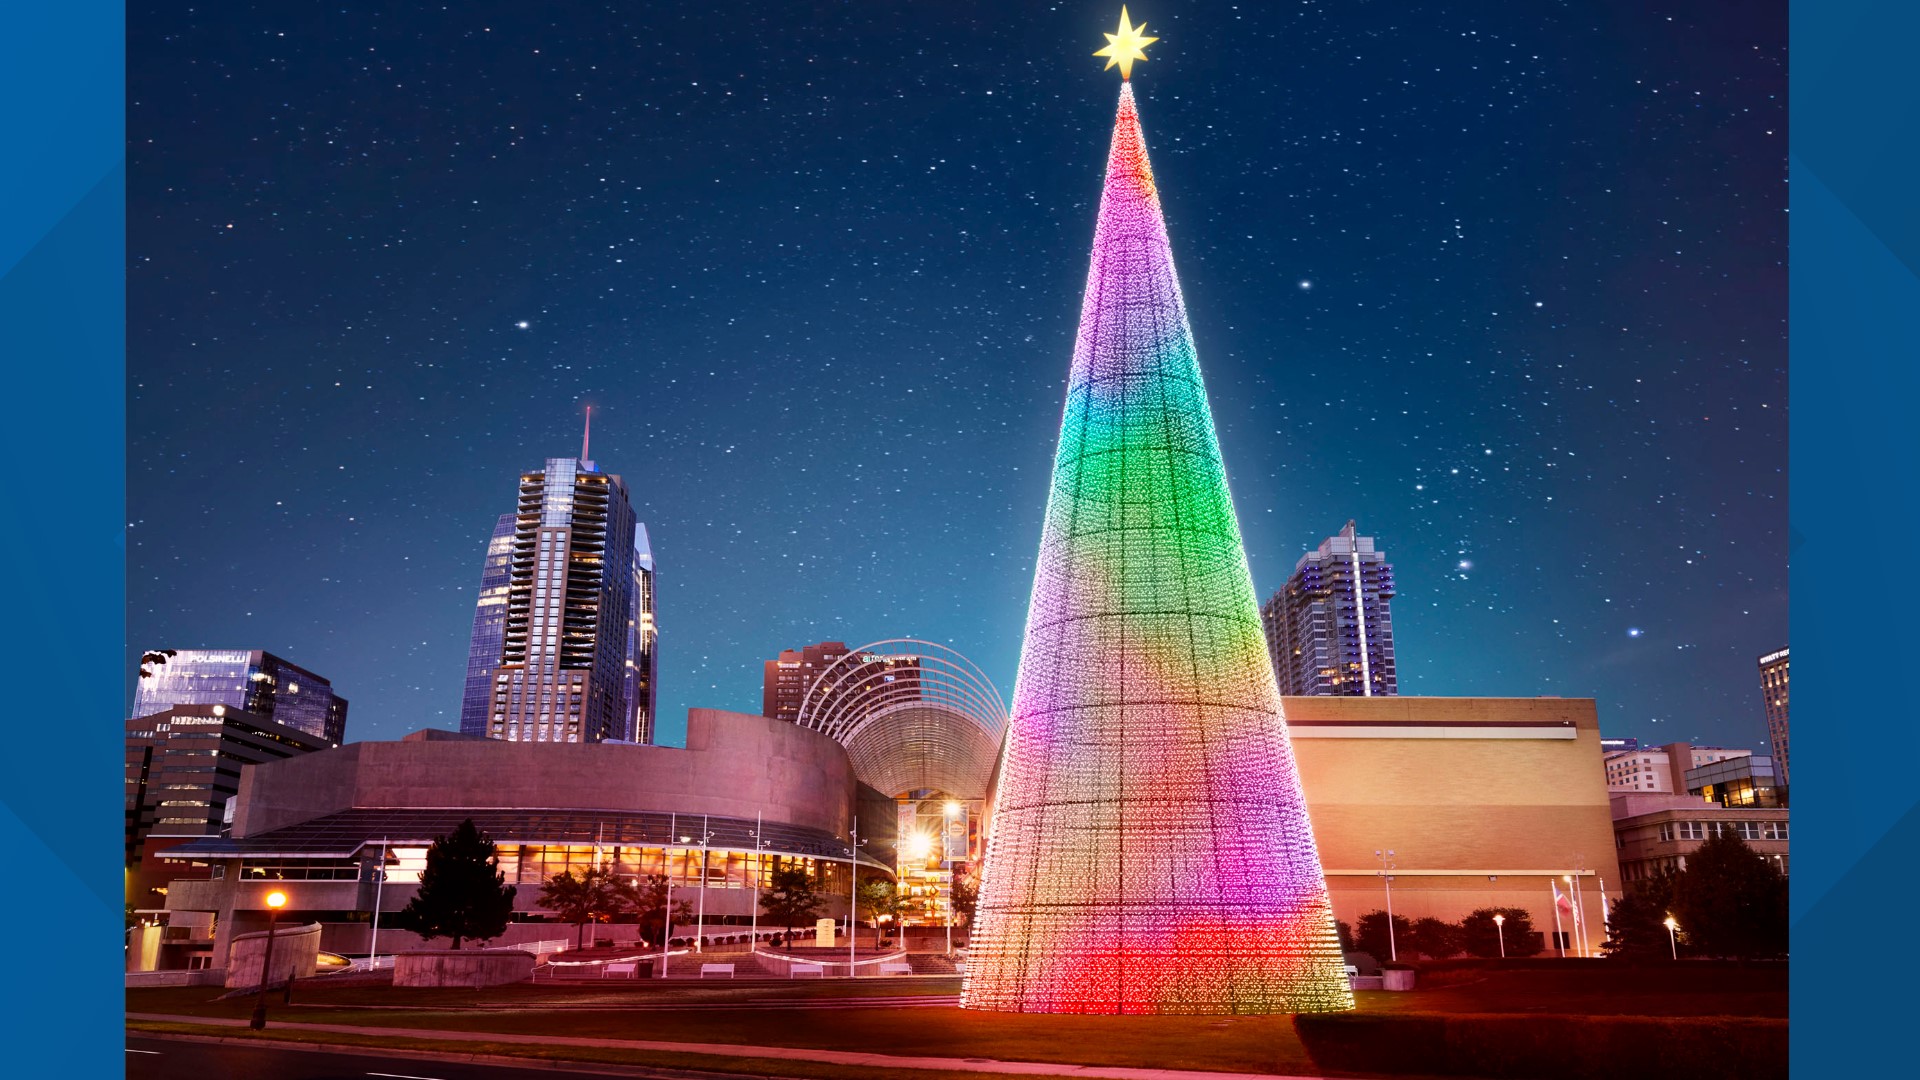 About 116,000 people visited the Mile High Tree over the holiday season, according to VISIT DENVER.